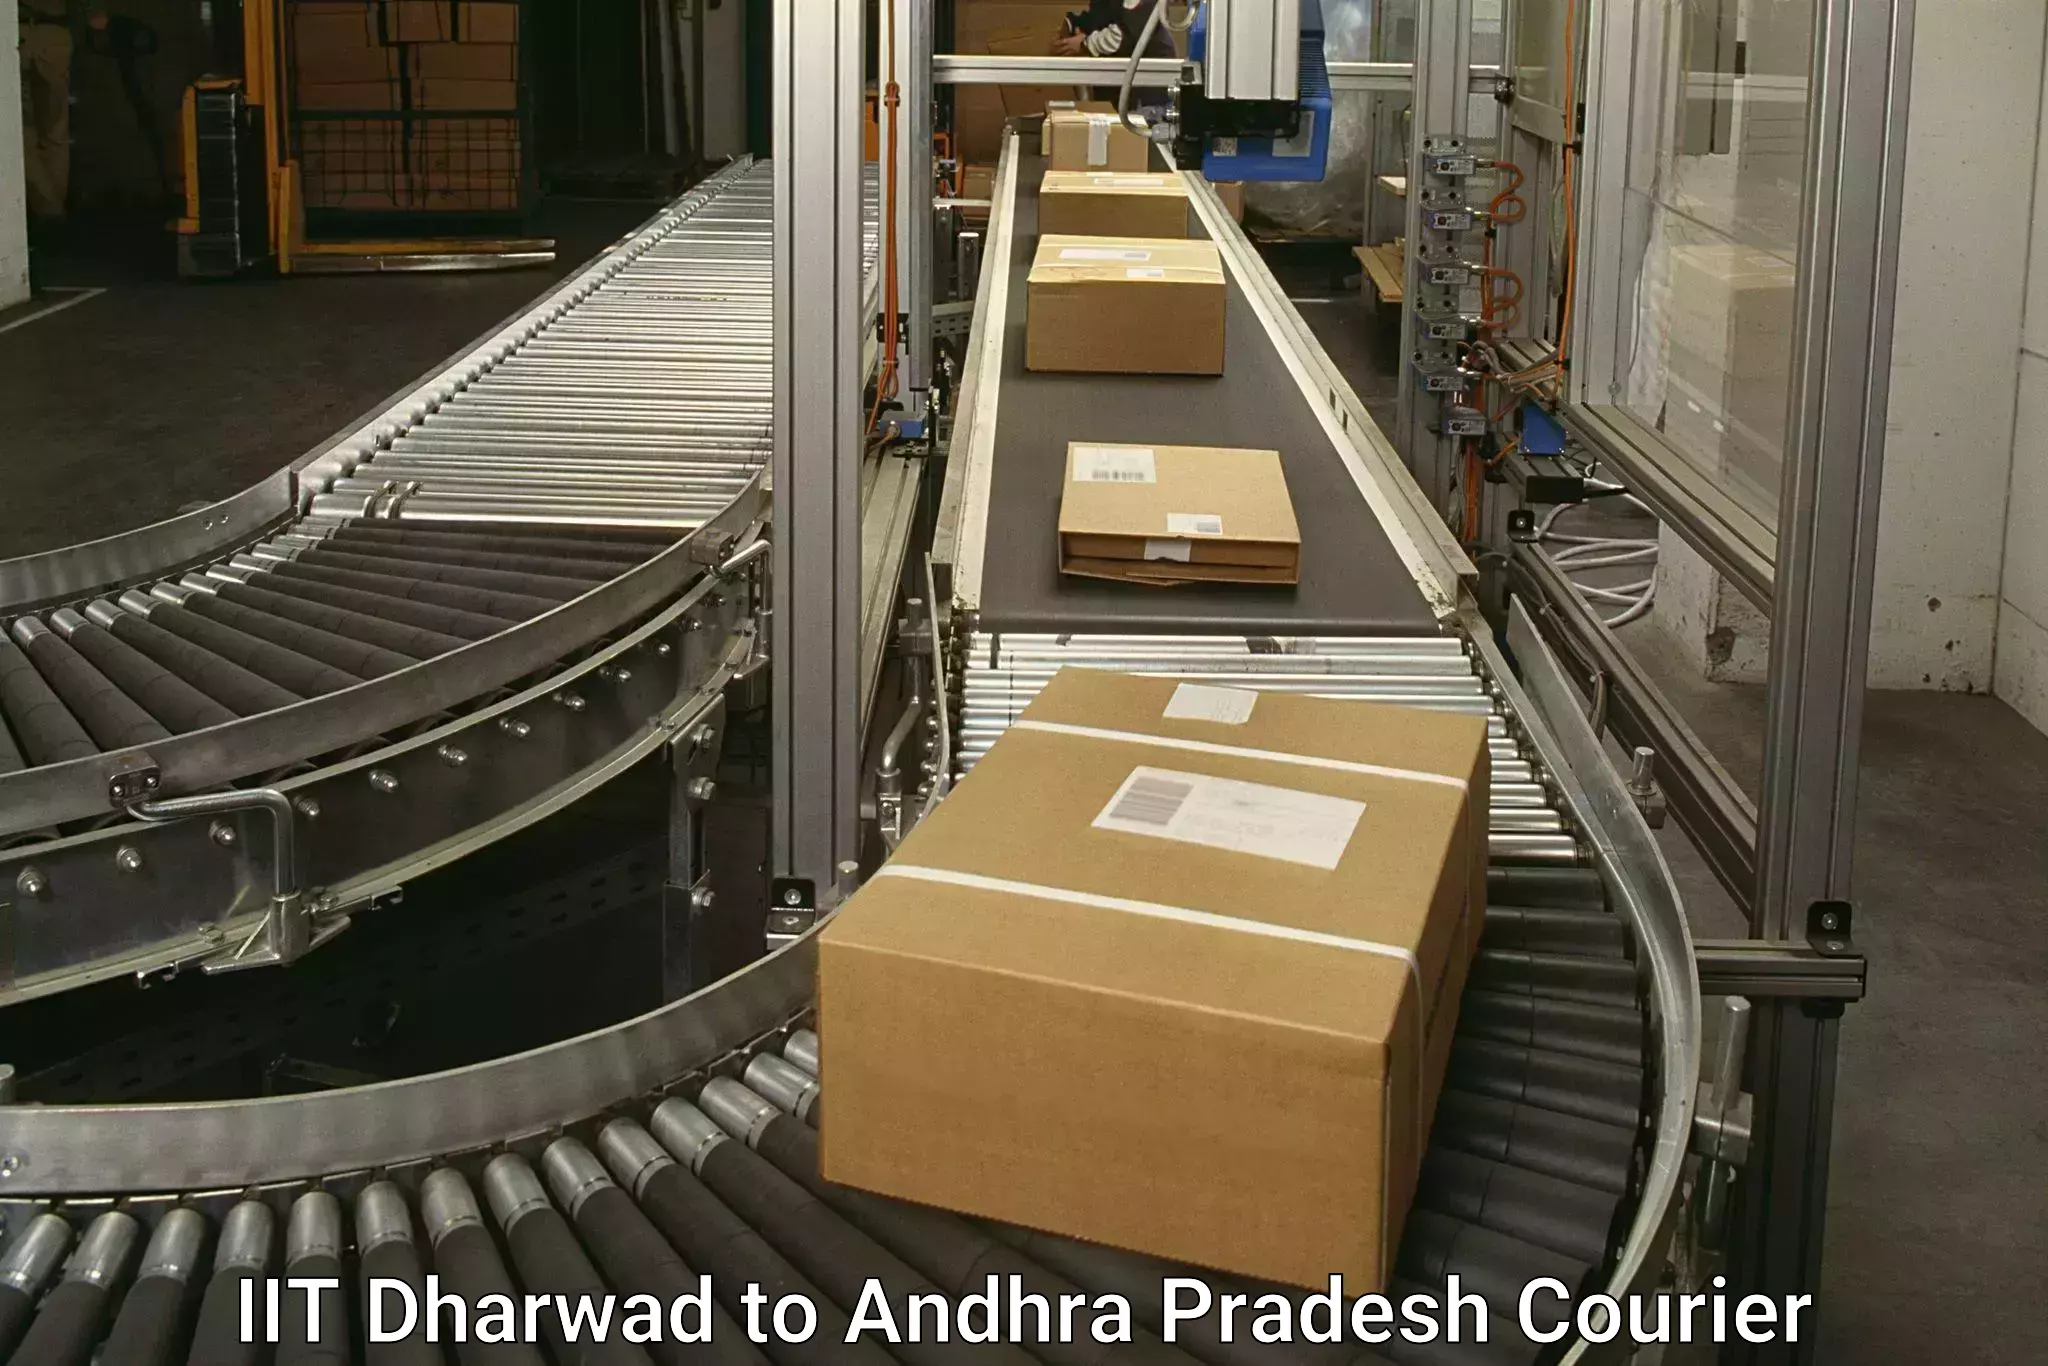 Express package delivery in IIT Dharwad to Amalapuram